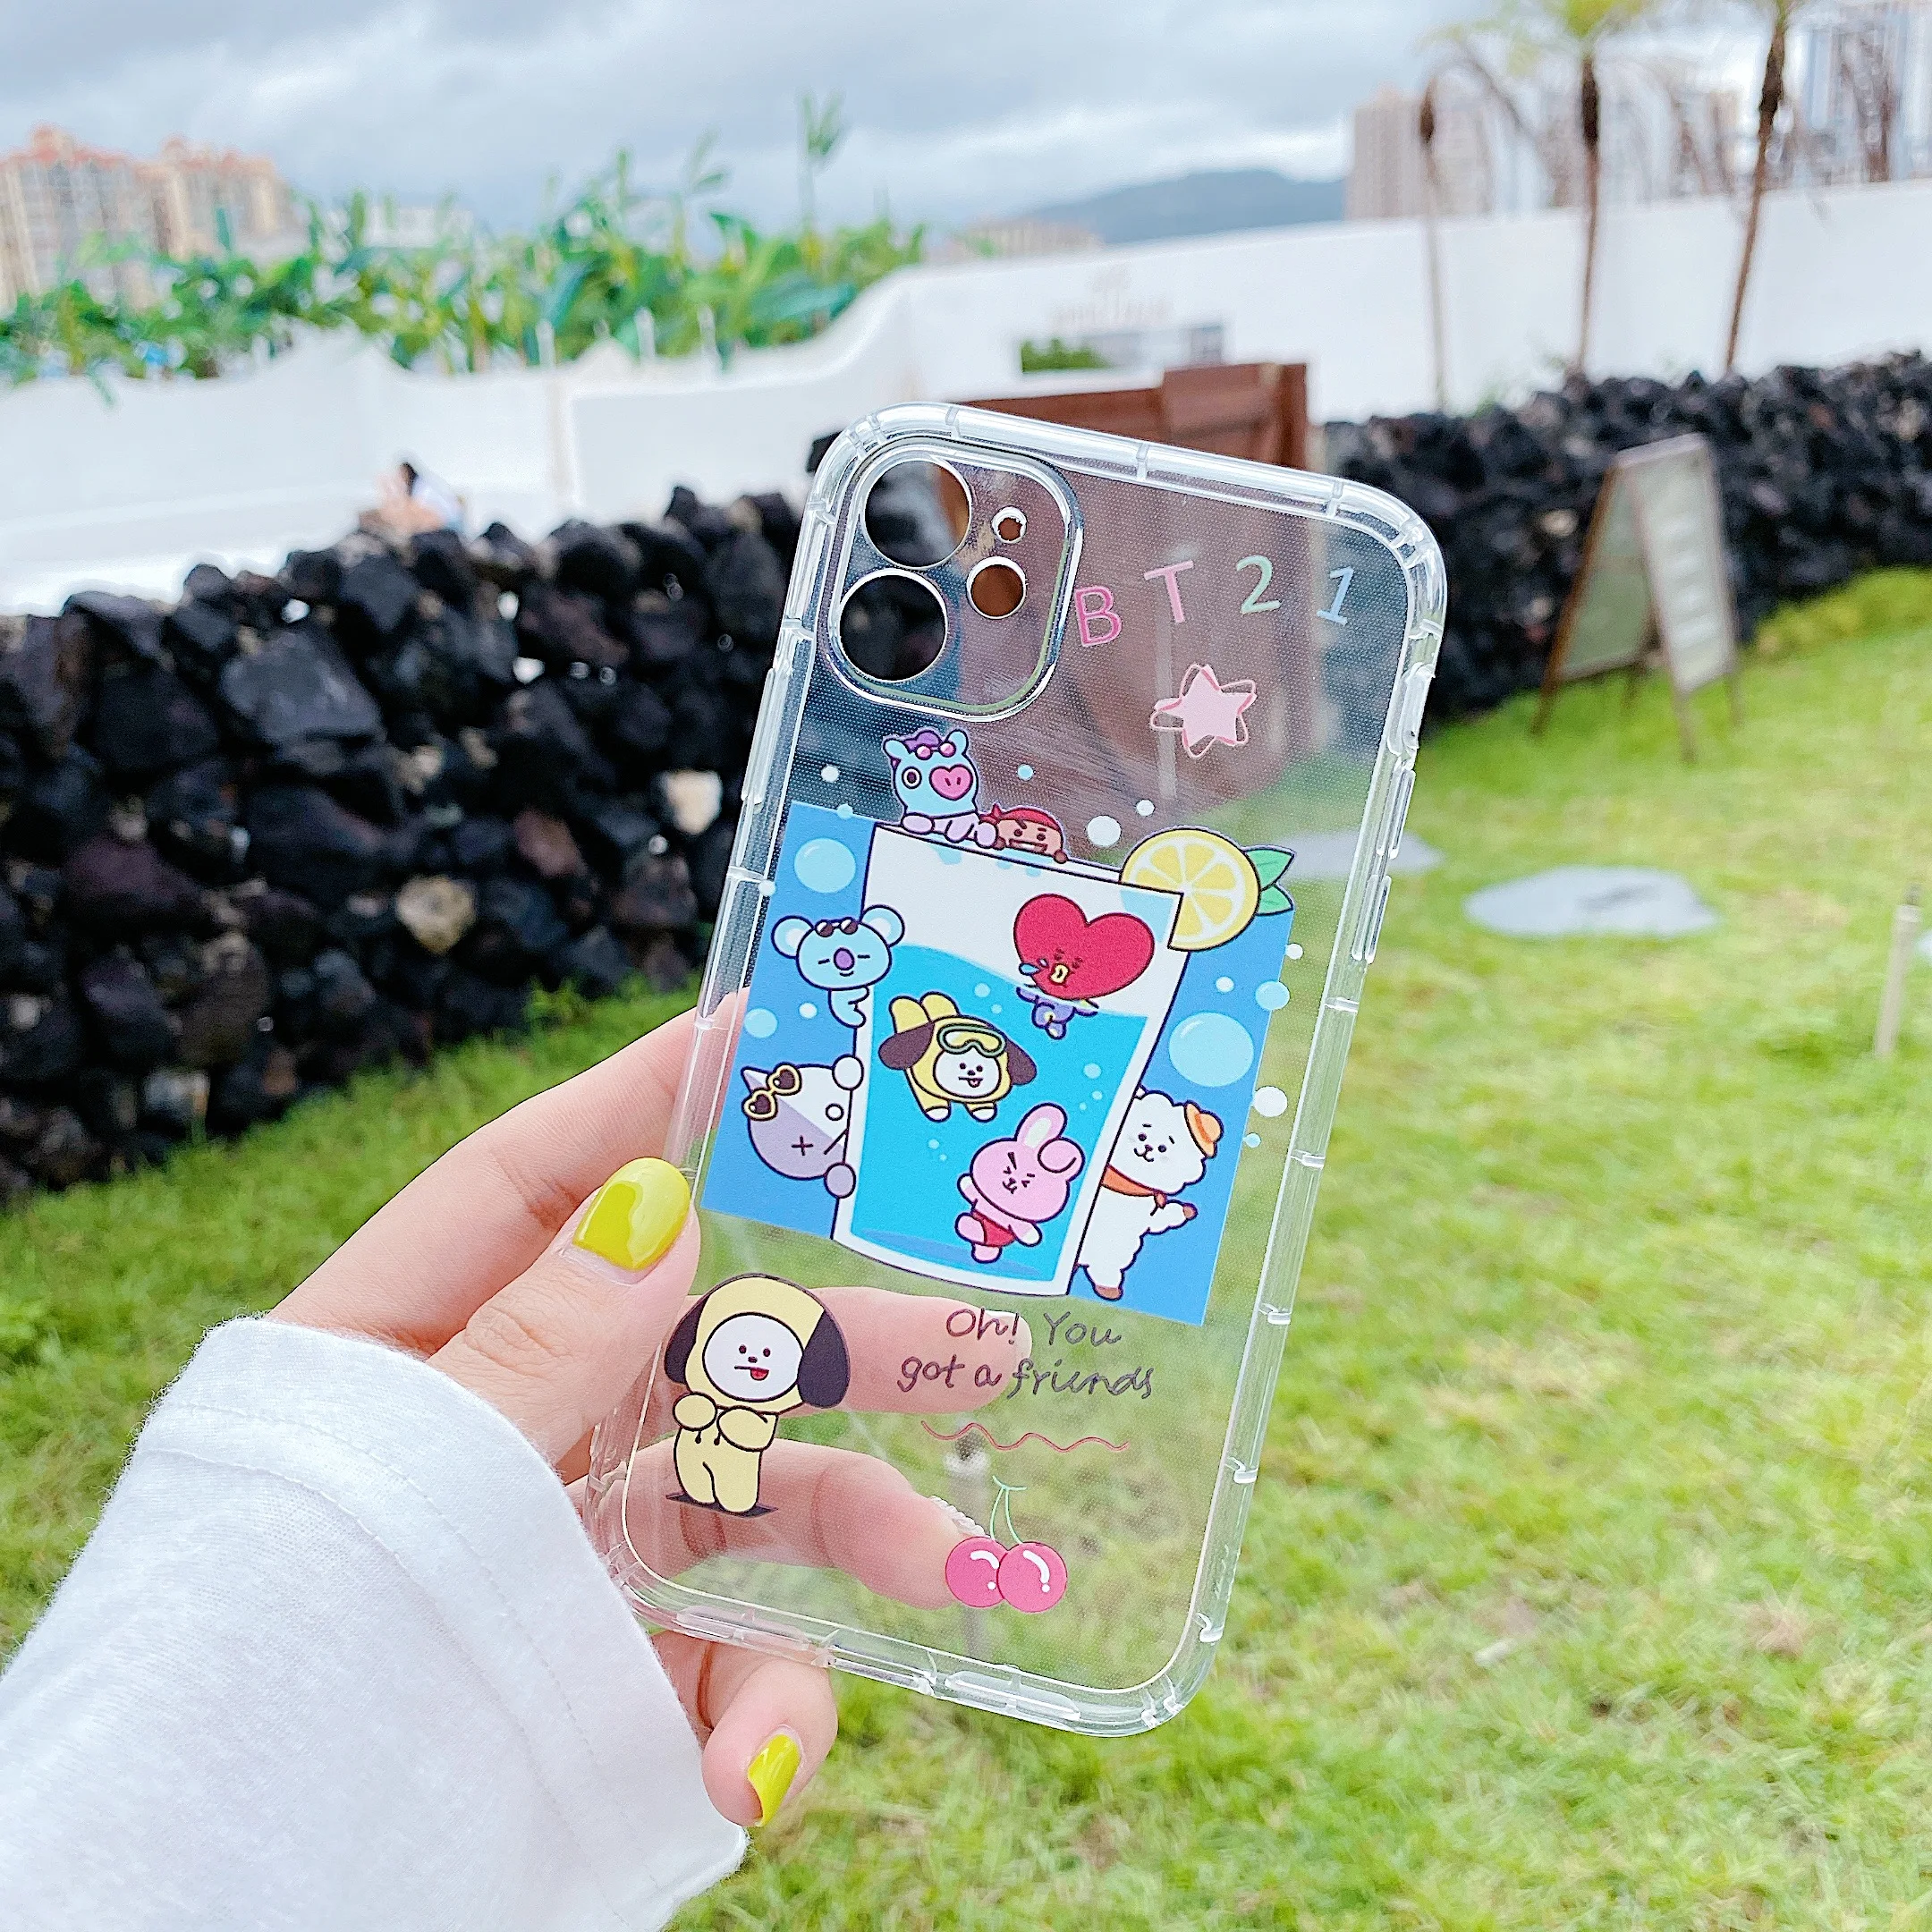 

BT21 Casing for Samsung Galaxy A21s A71 A51 A50 A30s A50s A70 A20 A30 A10 A7 2018 Shockproof Protective Back Cover, As picture